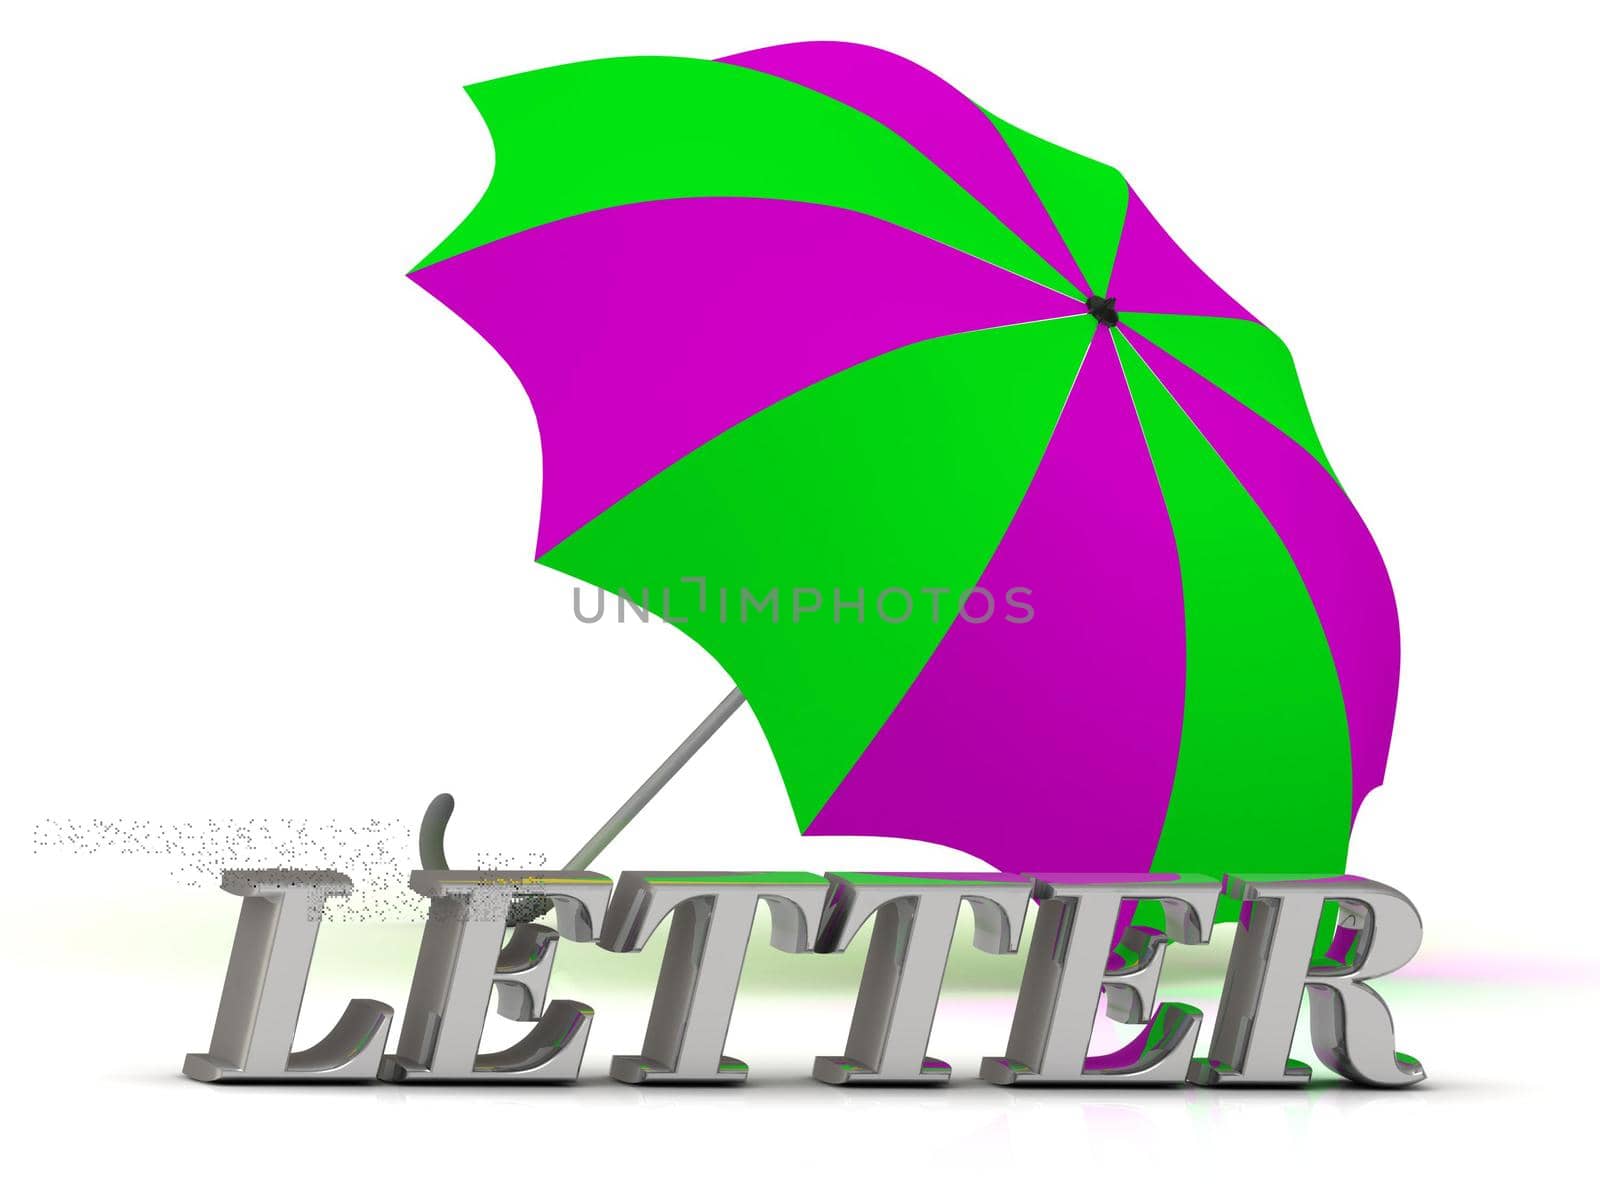 LETTER- inscription of silver letters and umbrella on white background